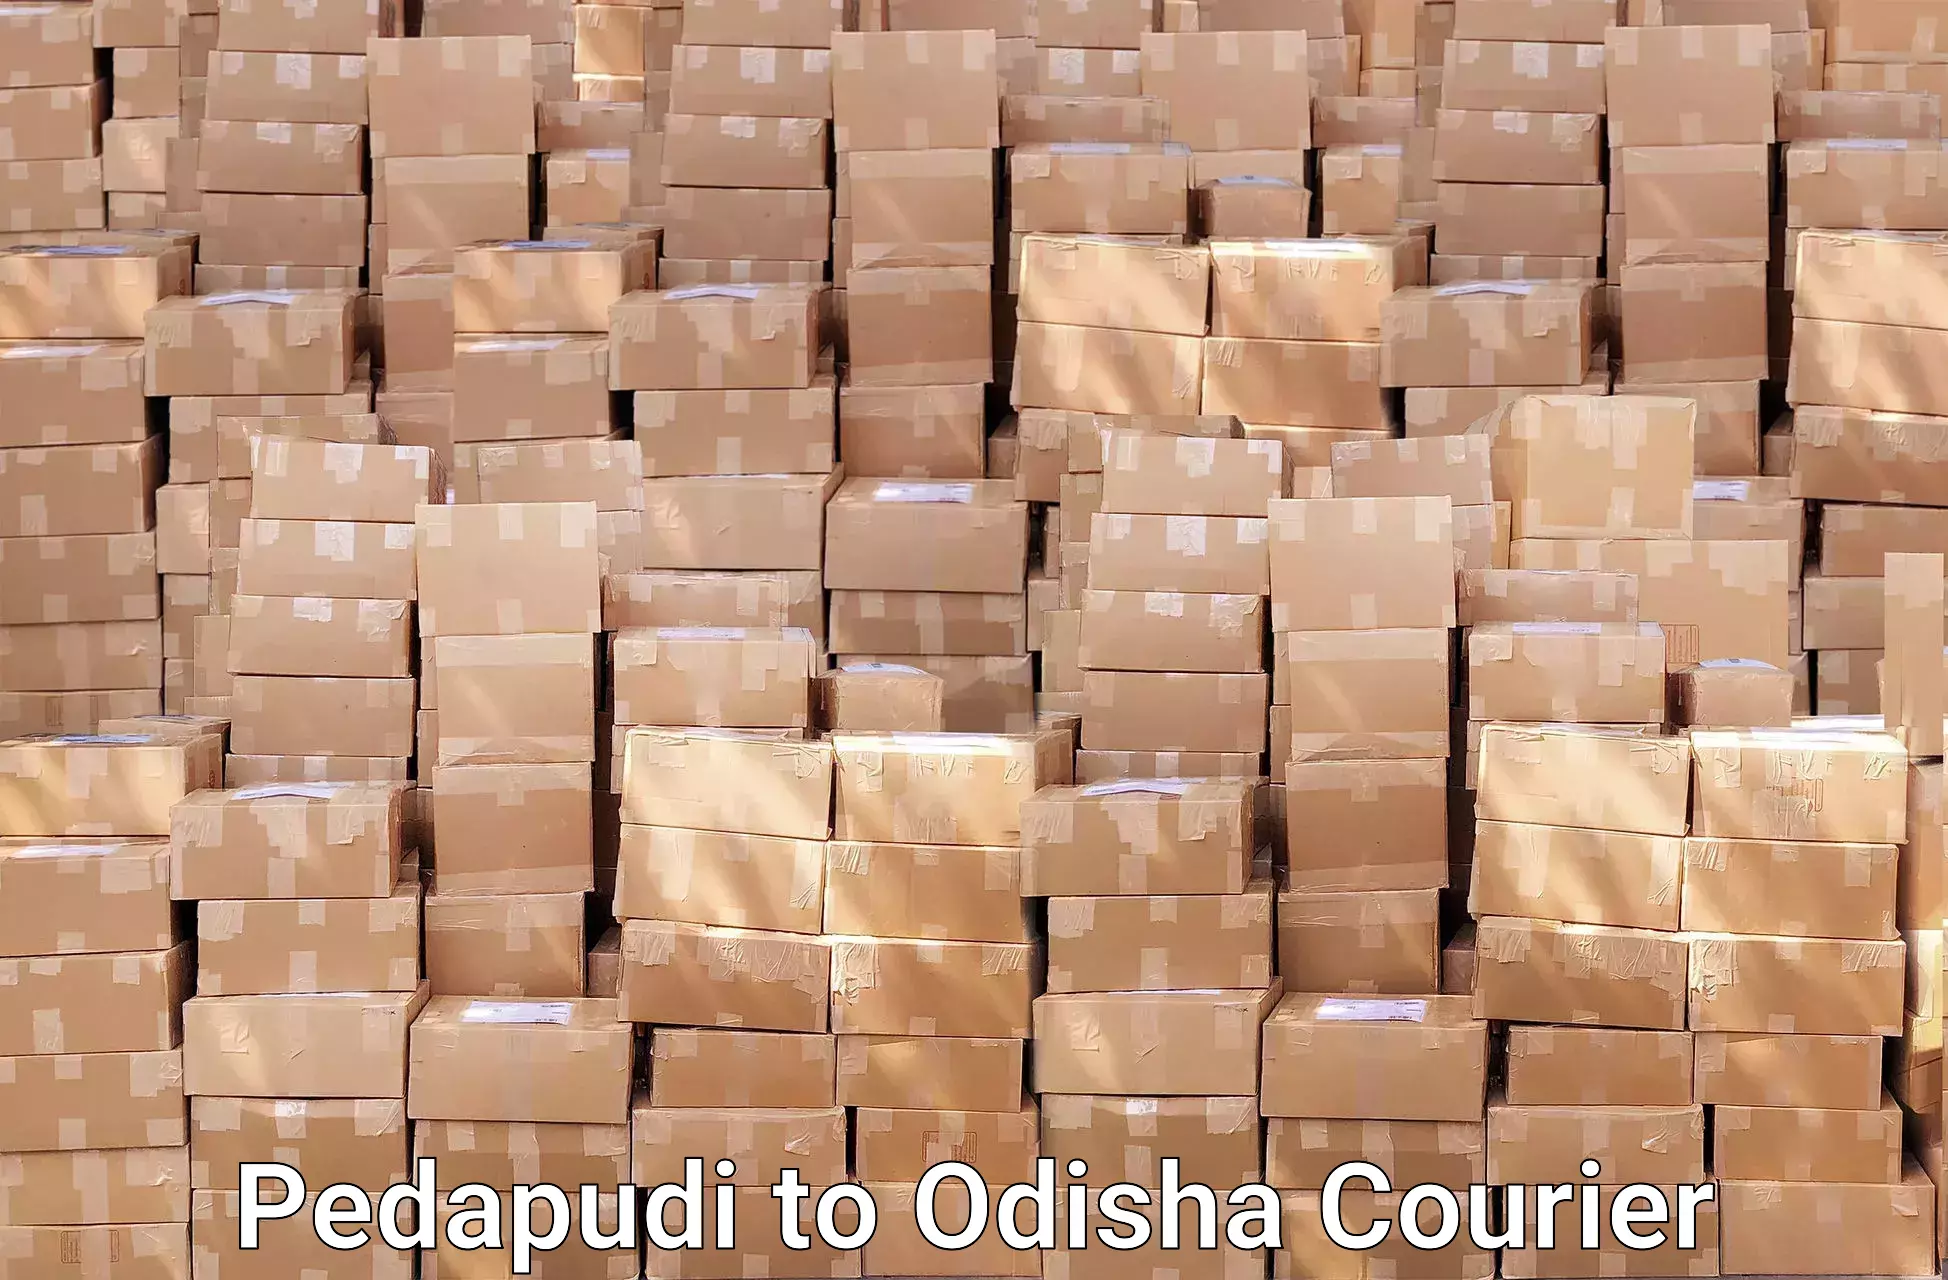 Efficient moving company Pedapudi to Swampatna